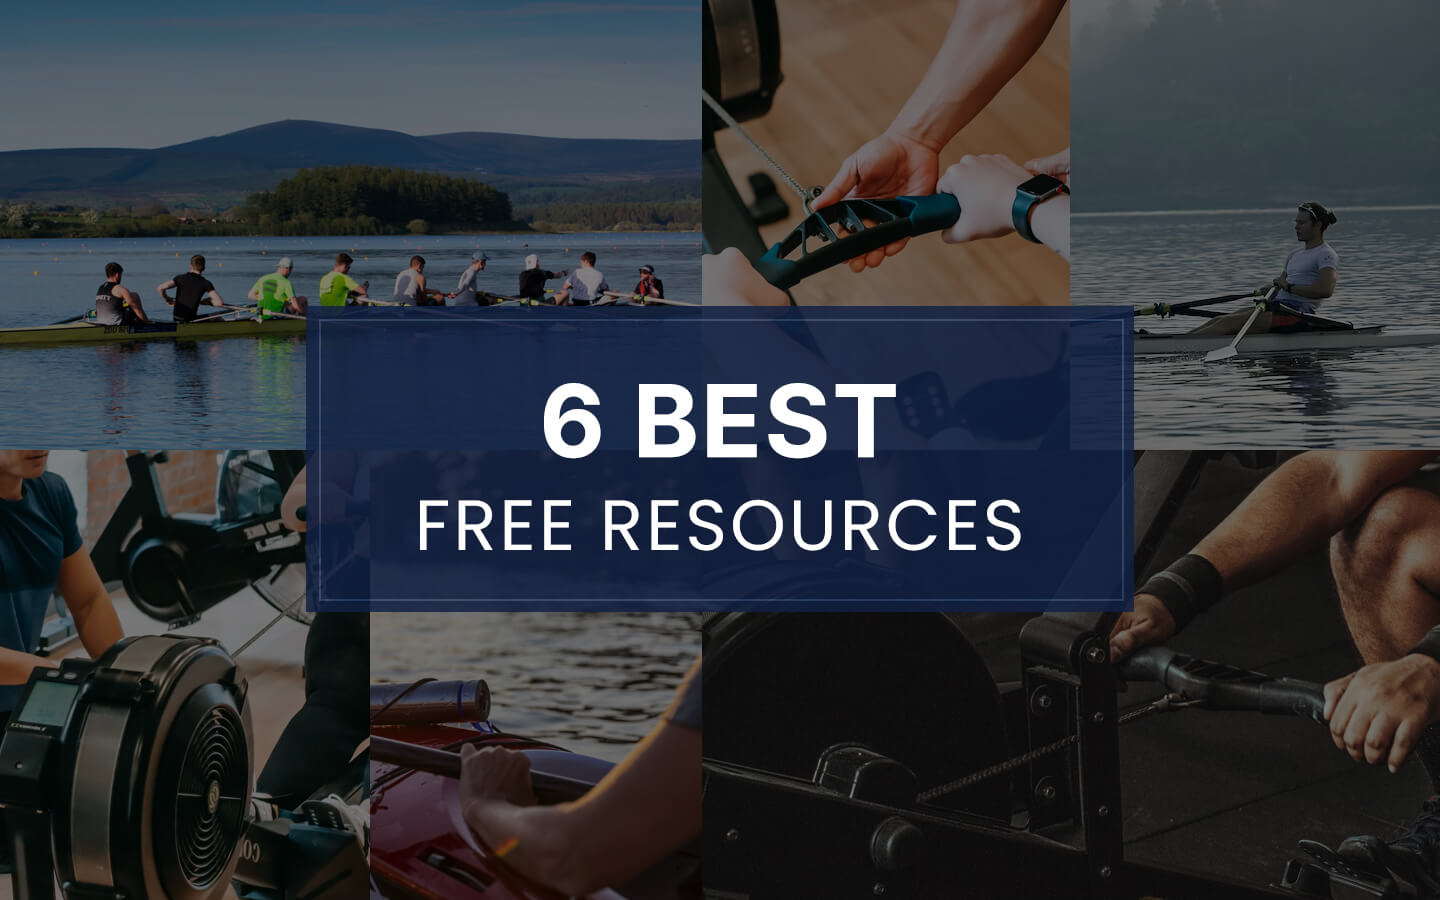 online rowing workouts